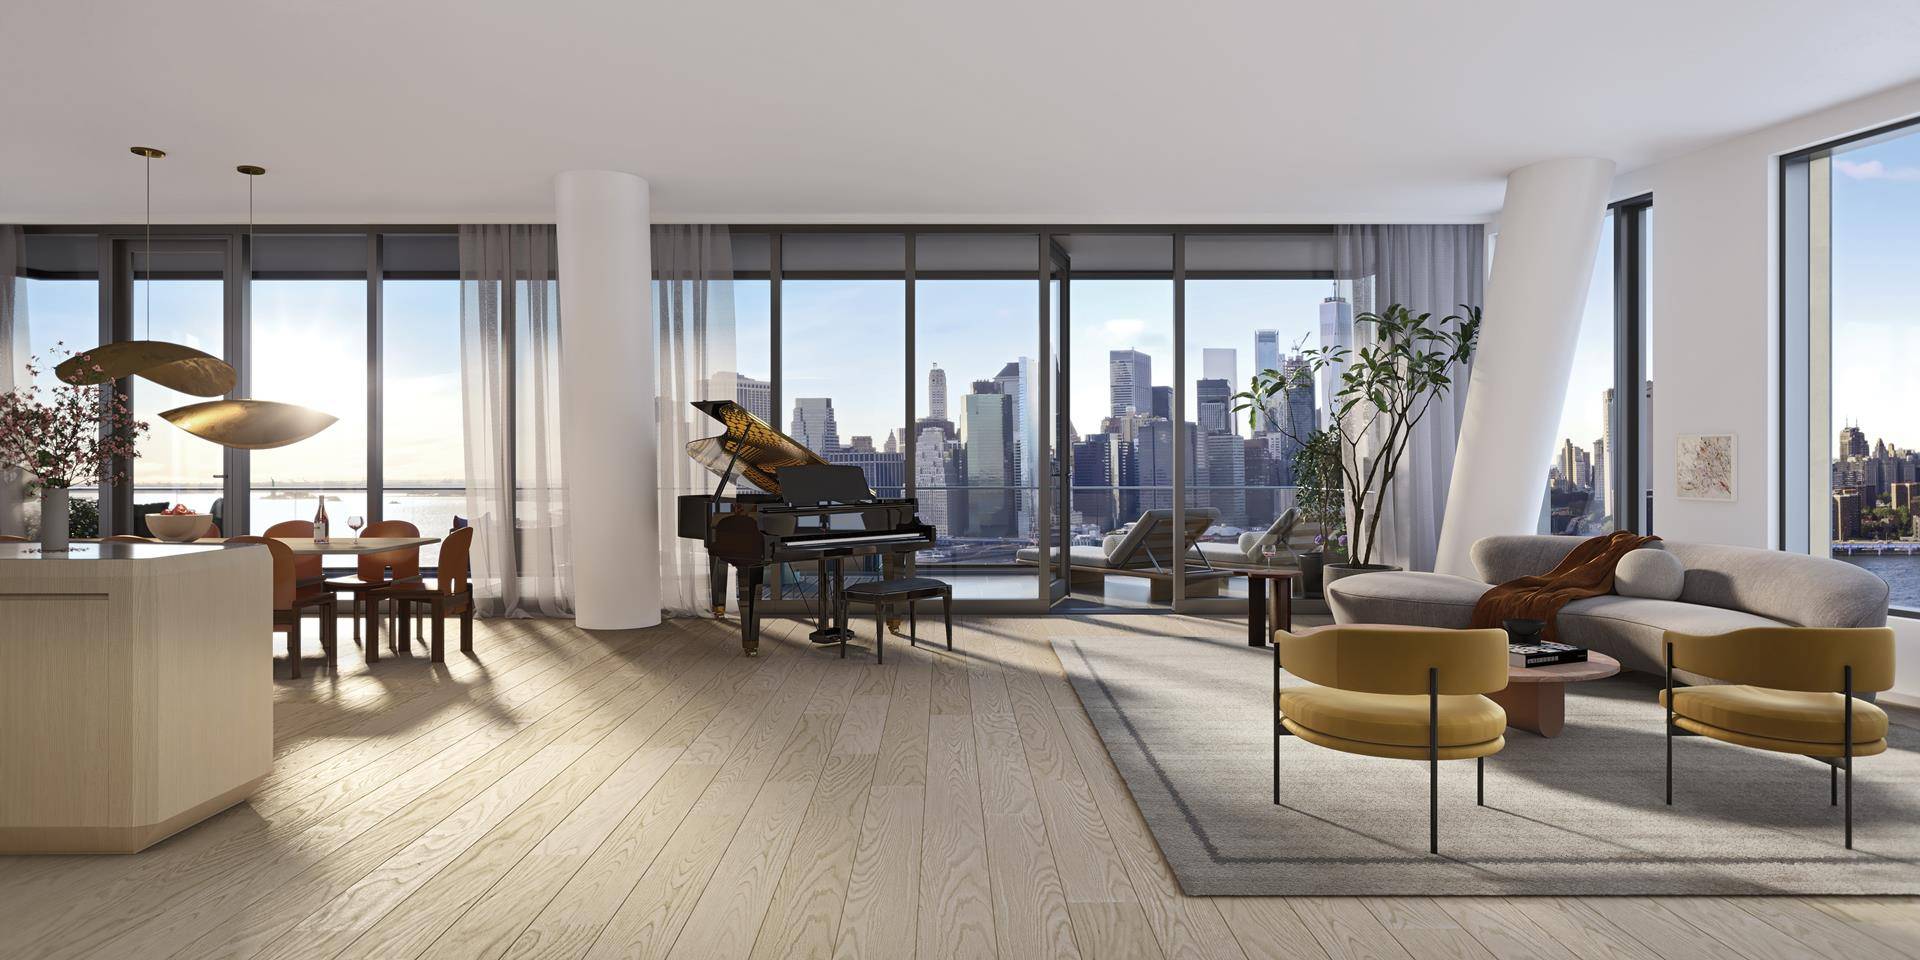 Offering views of the New York Harbor and Downtown Brooklyn, Residence 23D is the definition of reimagined luxury in the heart of Dumbo.